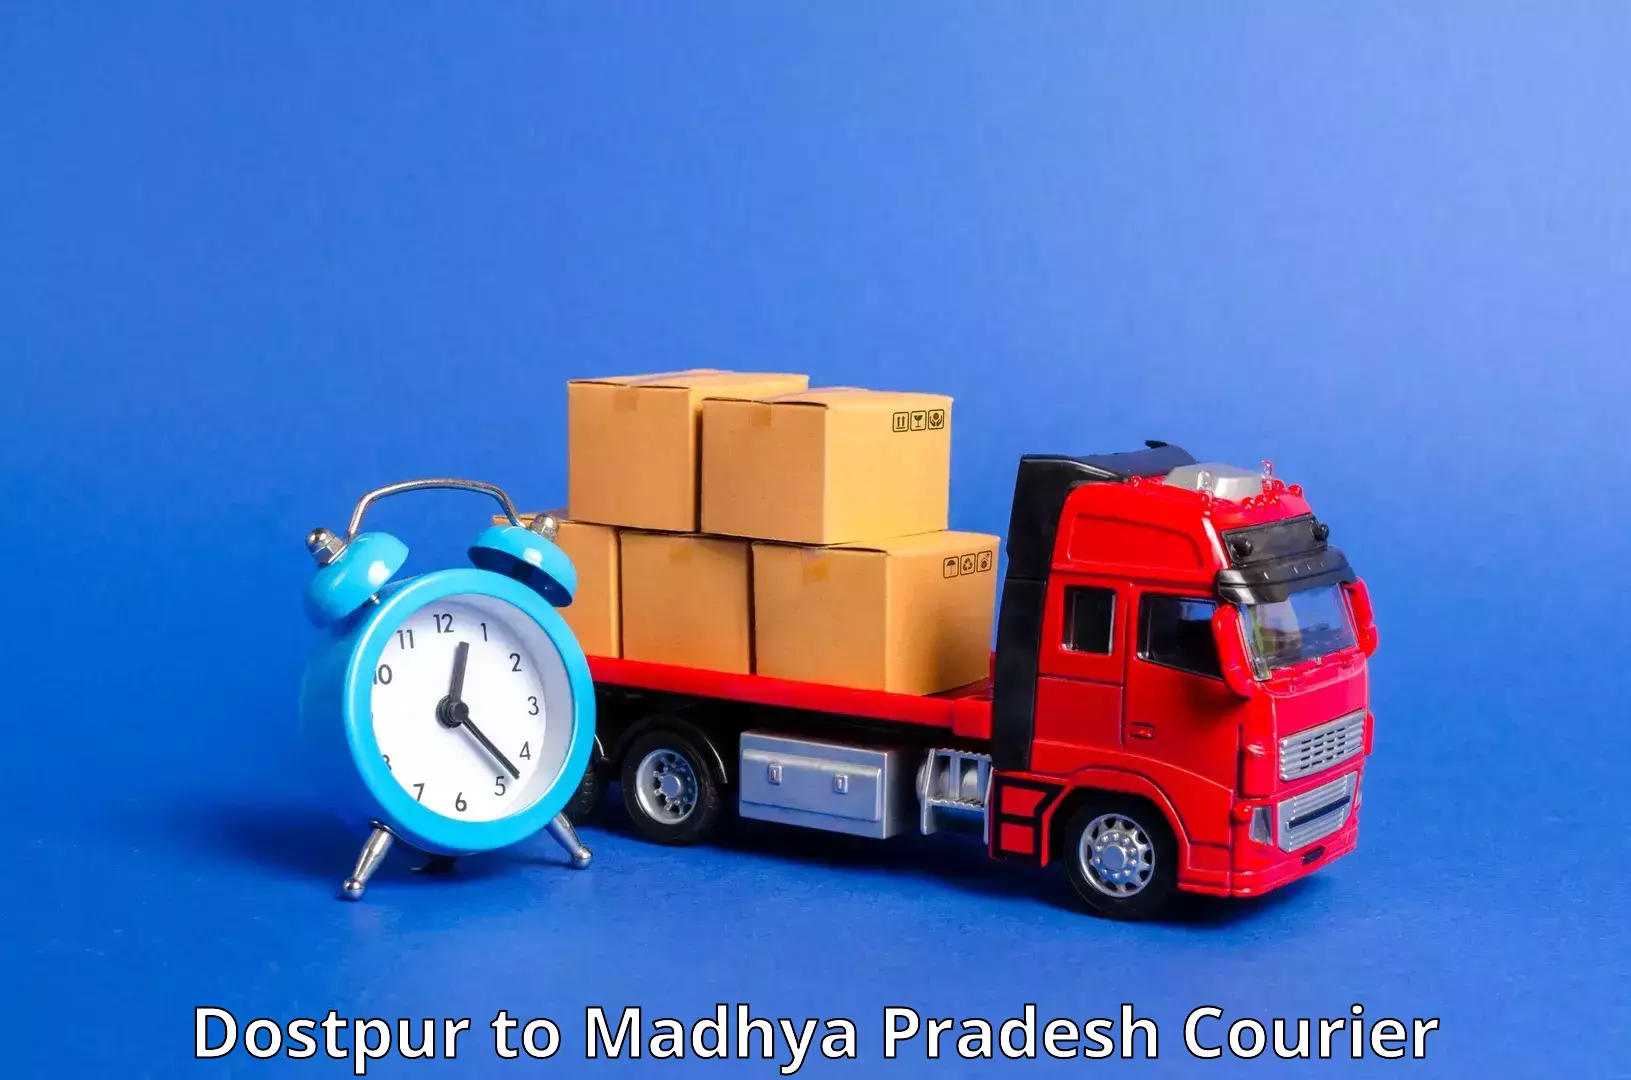 Fast delivery service Dostpur to Madhya Pradesh